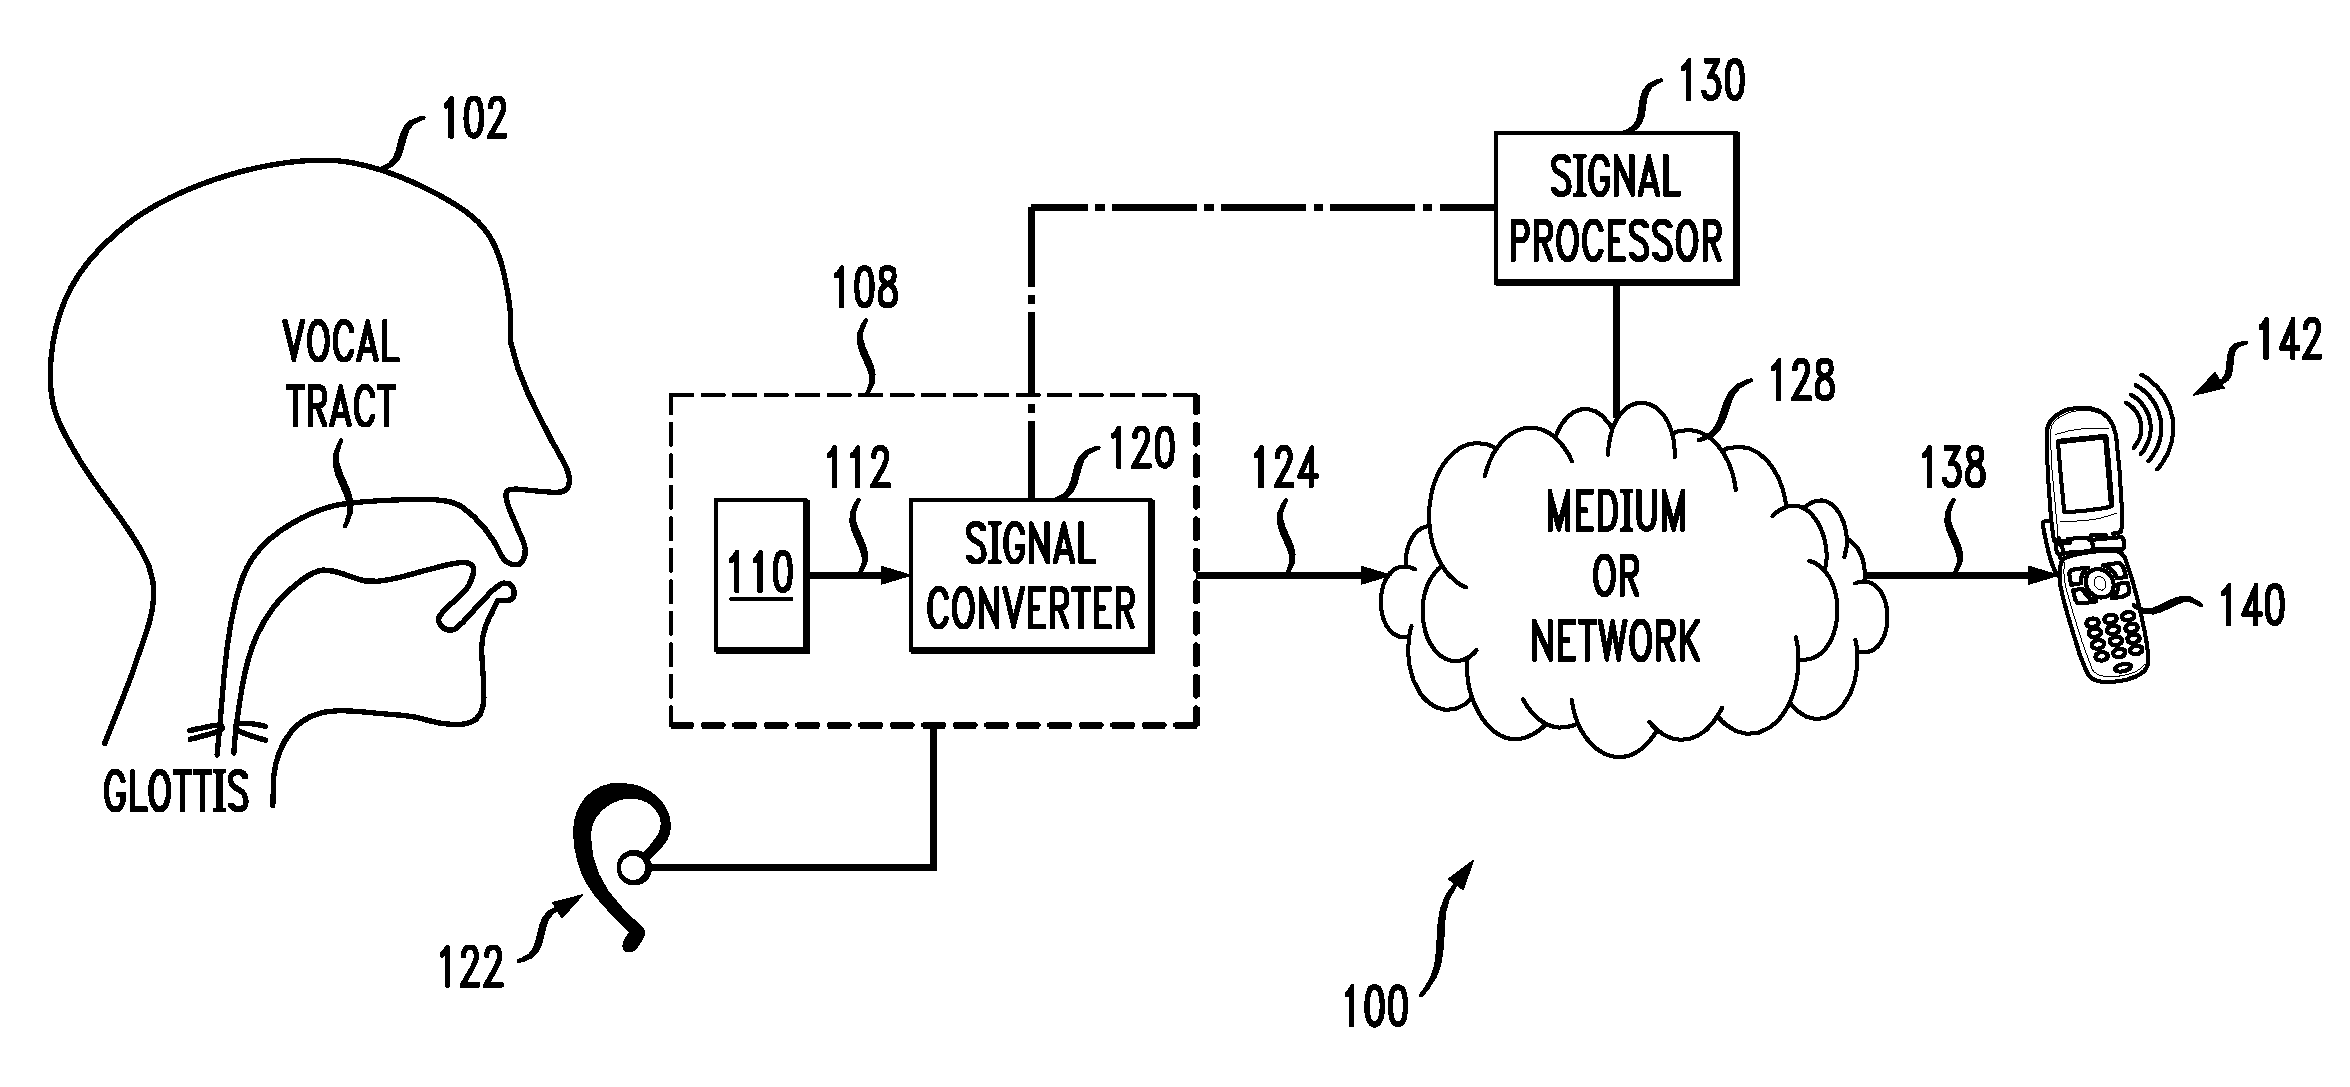 Voice-estimation interface and communication system